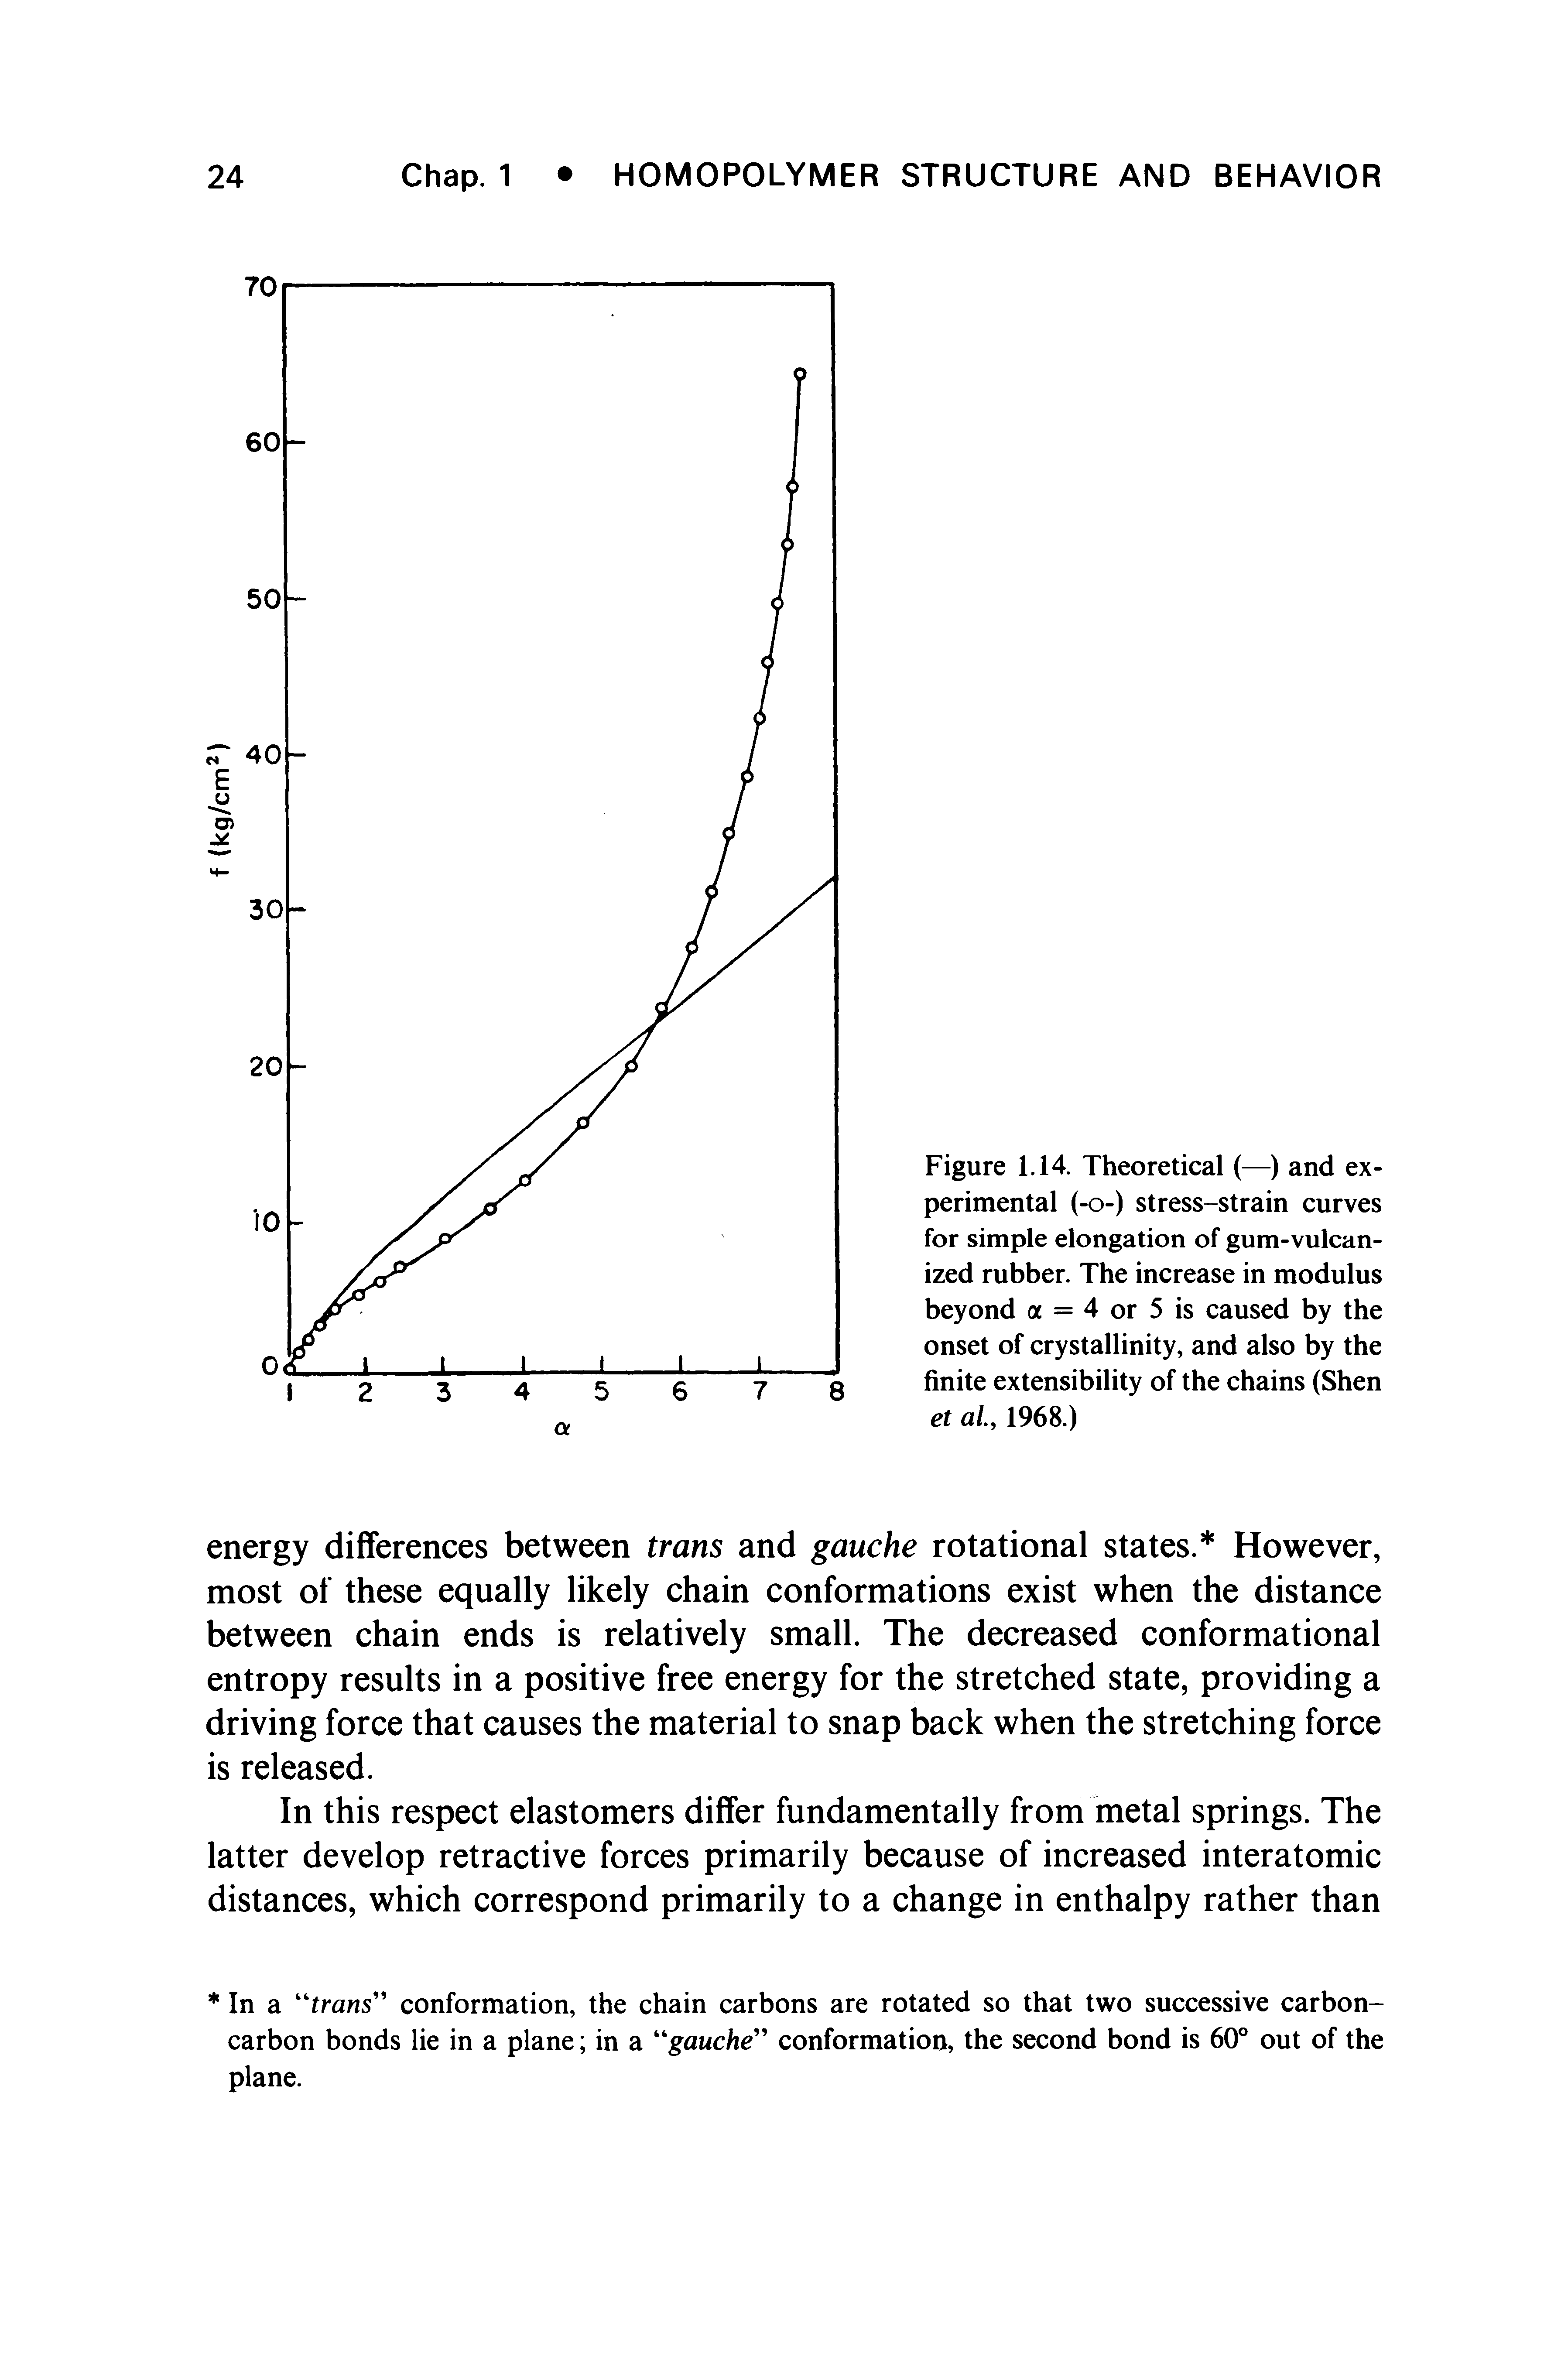 Figure 1.14. Theoretical (—) and experimental (-0-) stress-strain curves for simple elongation of gum-vulcanized rubber. The increase in modulus beyond a = 4 or 5 is caused by the onset of crystallinity, and also by the finite extensibility of the chains (Shen et al, 1968.)...